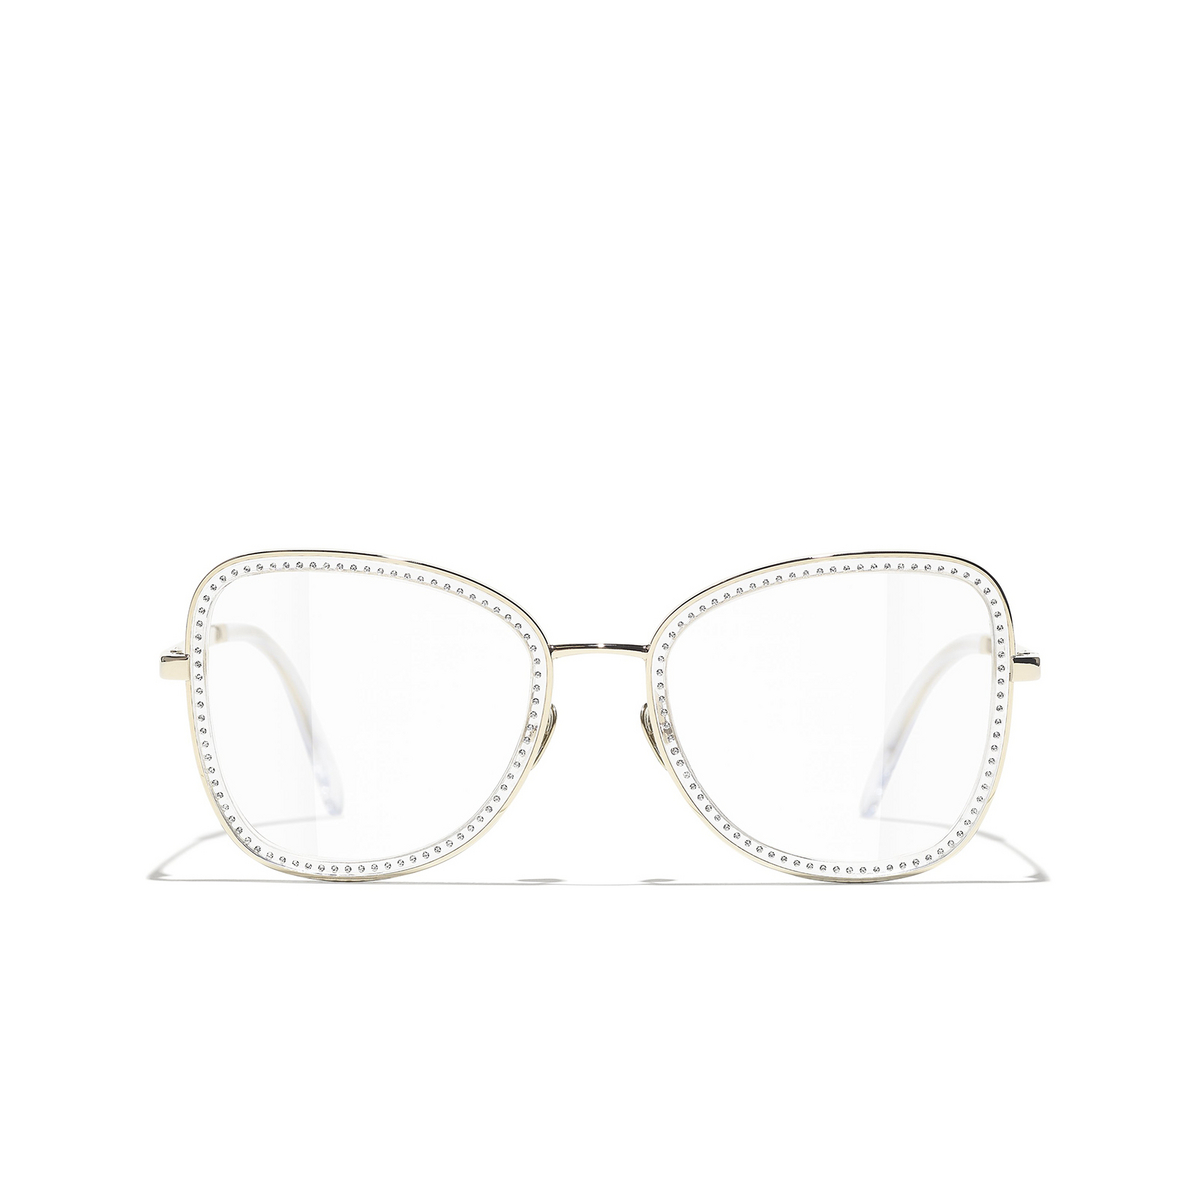 CHANEL square Eyeglasses C269 Pale Gold - front view